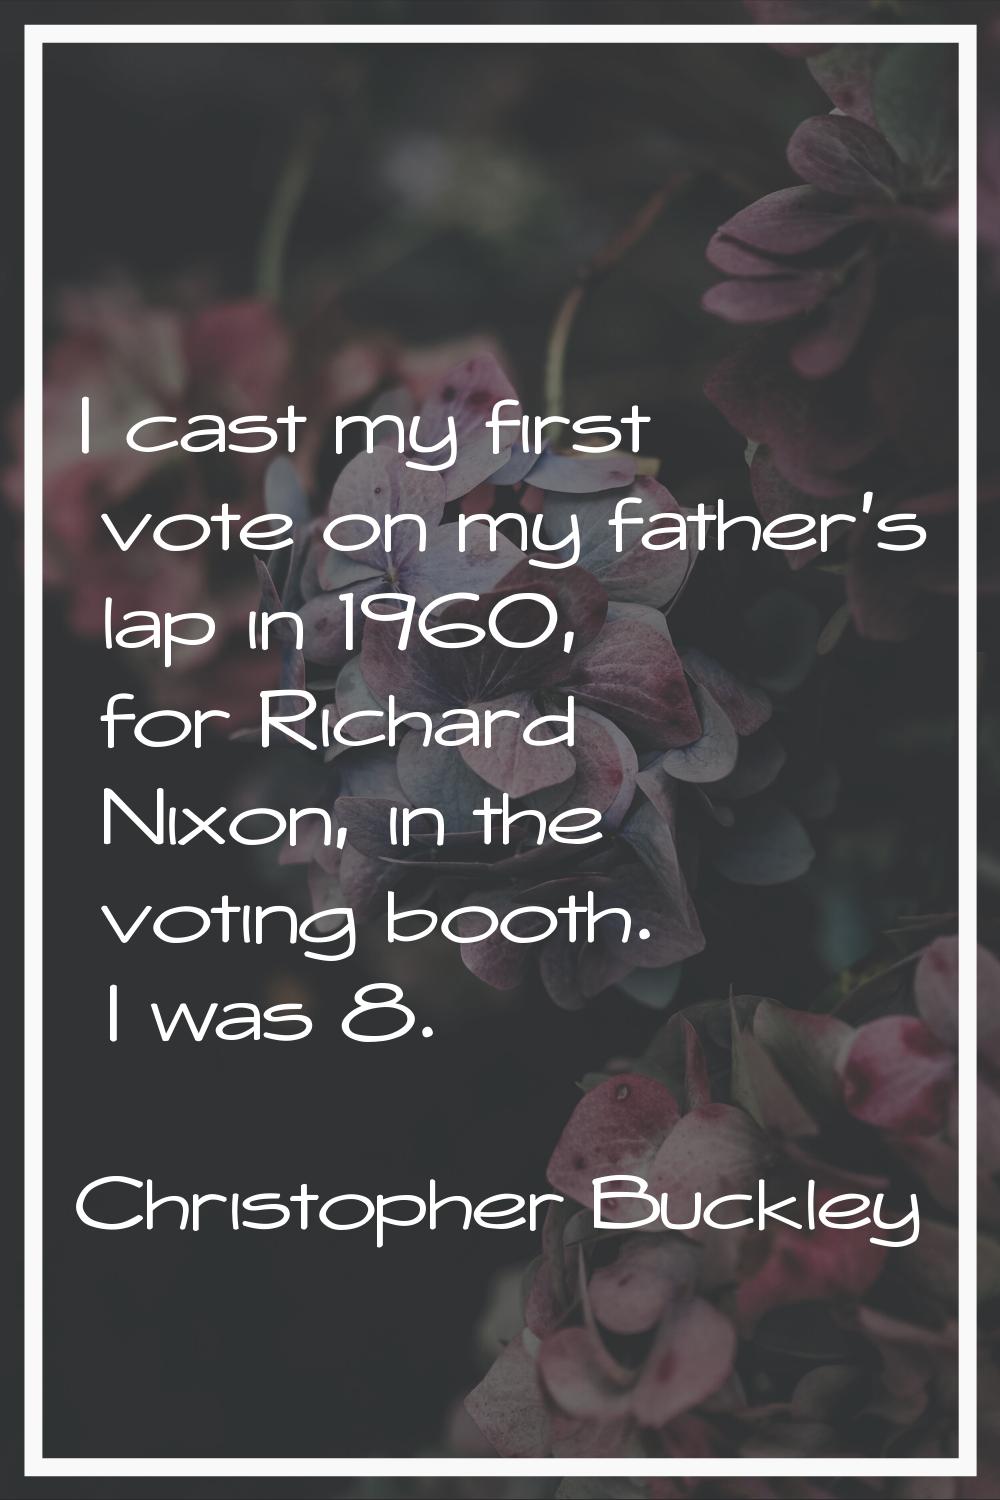 I cast my first vote on my father's lap in 1960, for Richard Nixon, in the voting booth. I was 8.